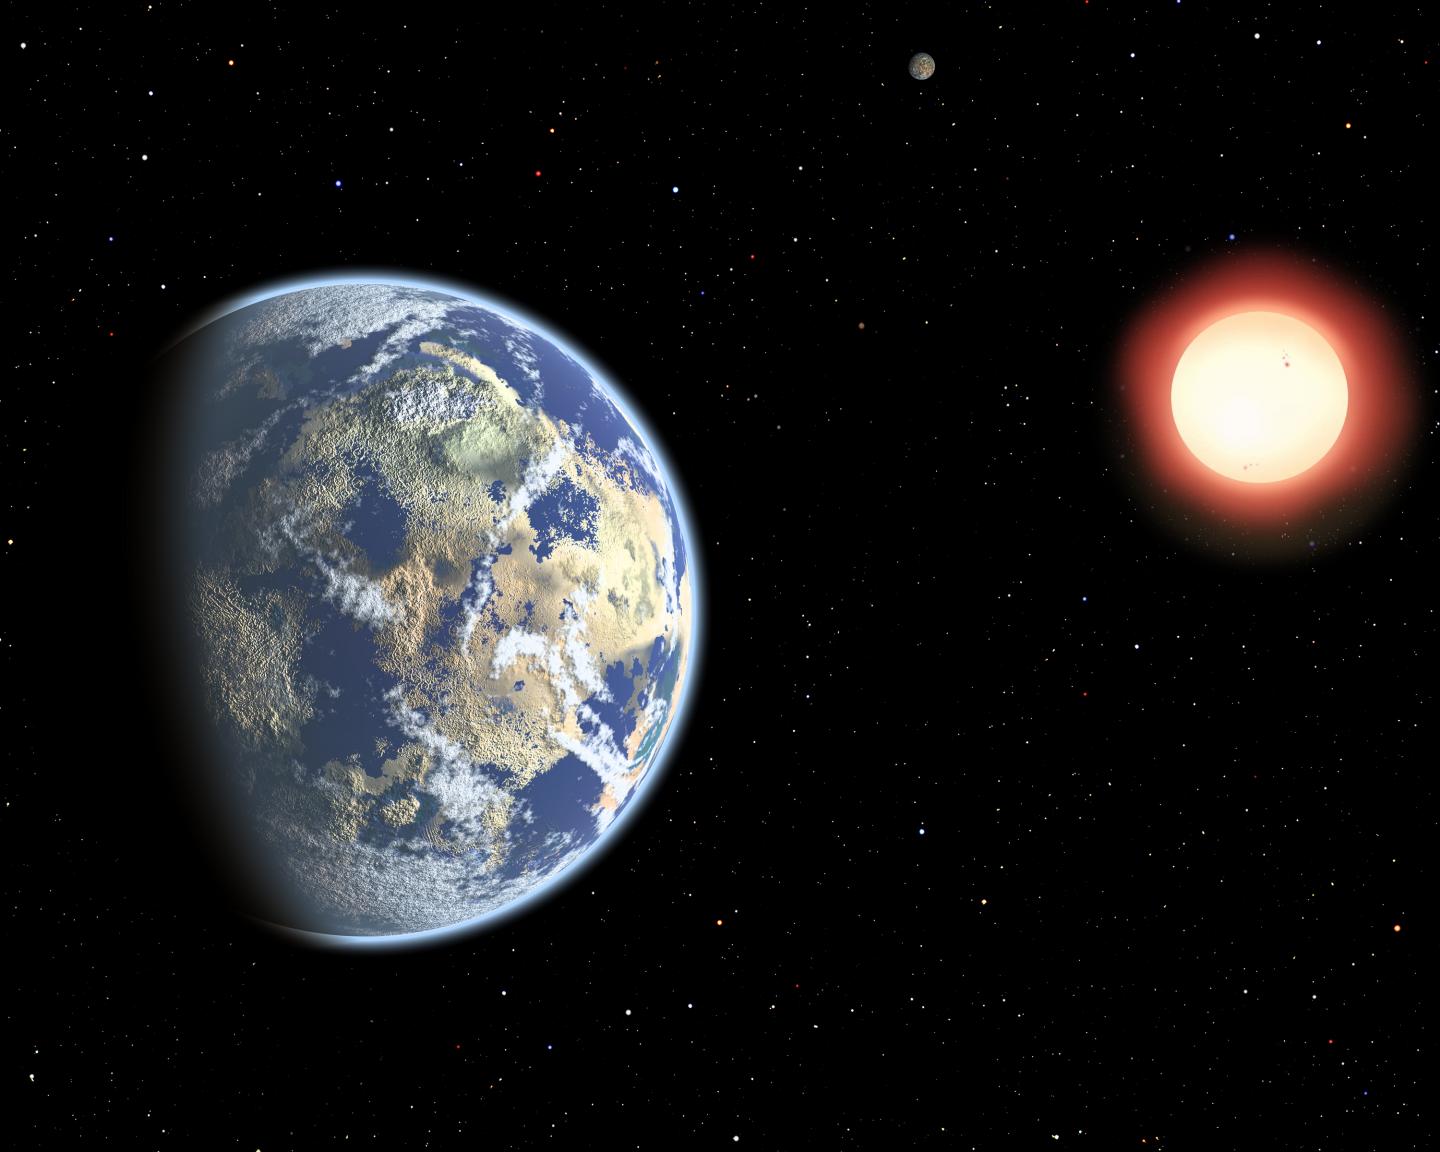 Artist's Conception of Planet Orbiting Red Dwarf Star